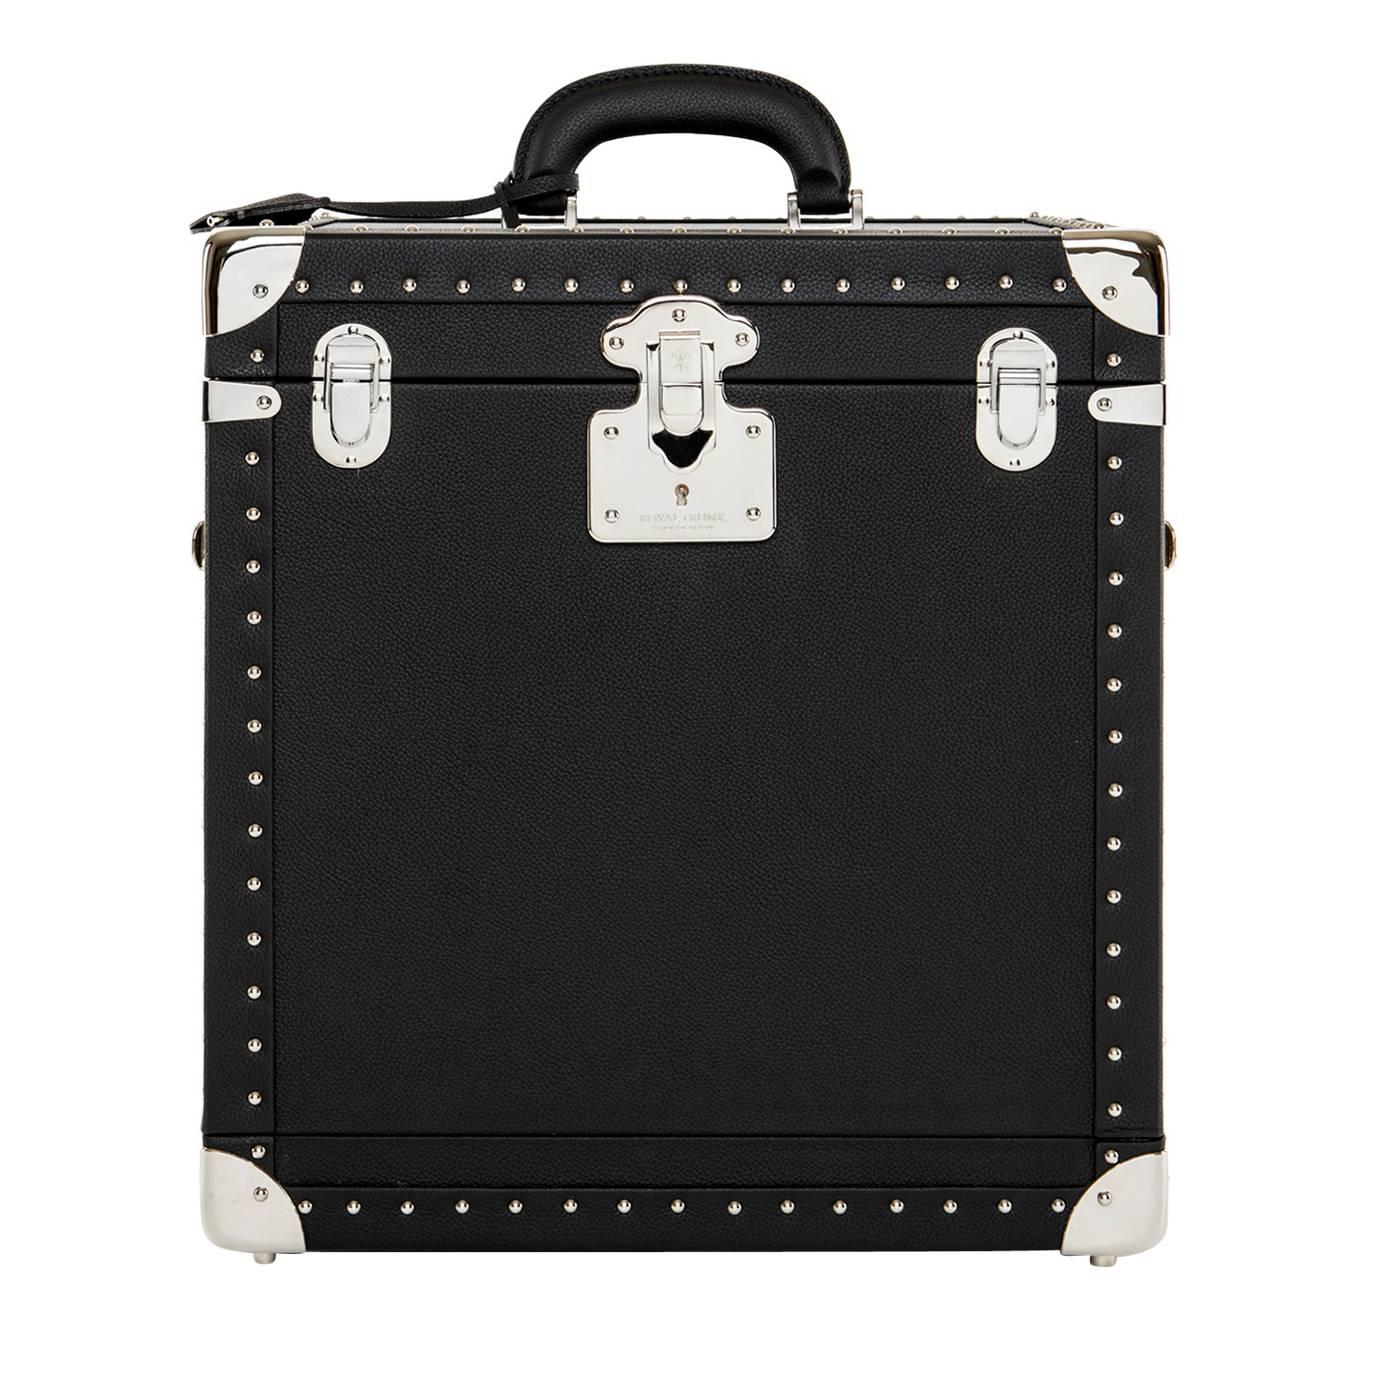 This refined beauty case created both for men and women features a leather exterior with handles in brass and decorated with handmade nails along its entire perimeter. The interior is lined in microfiber with a fixed mirror at the top and an